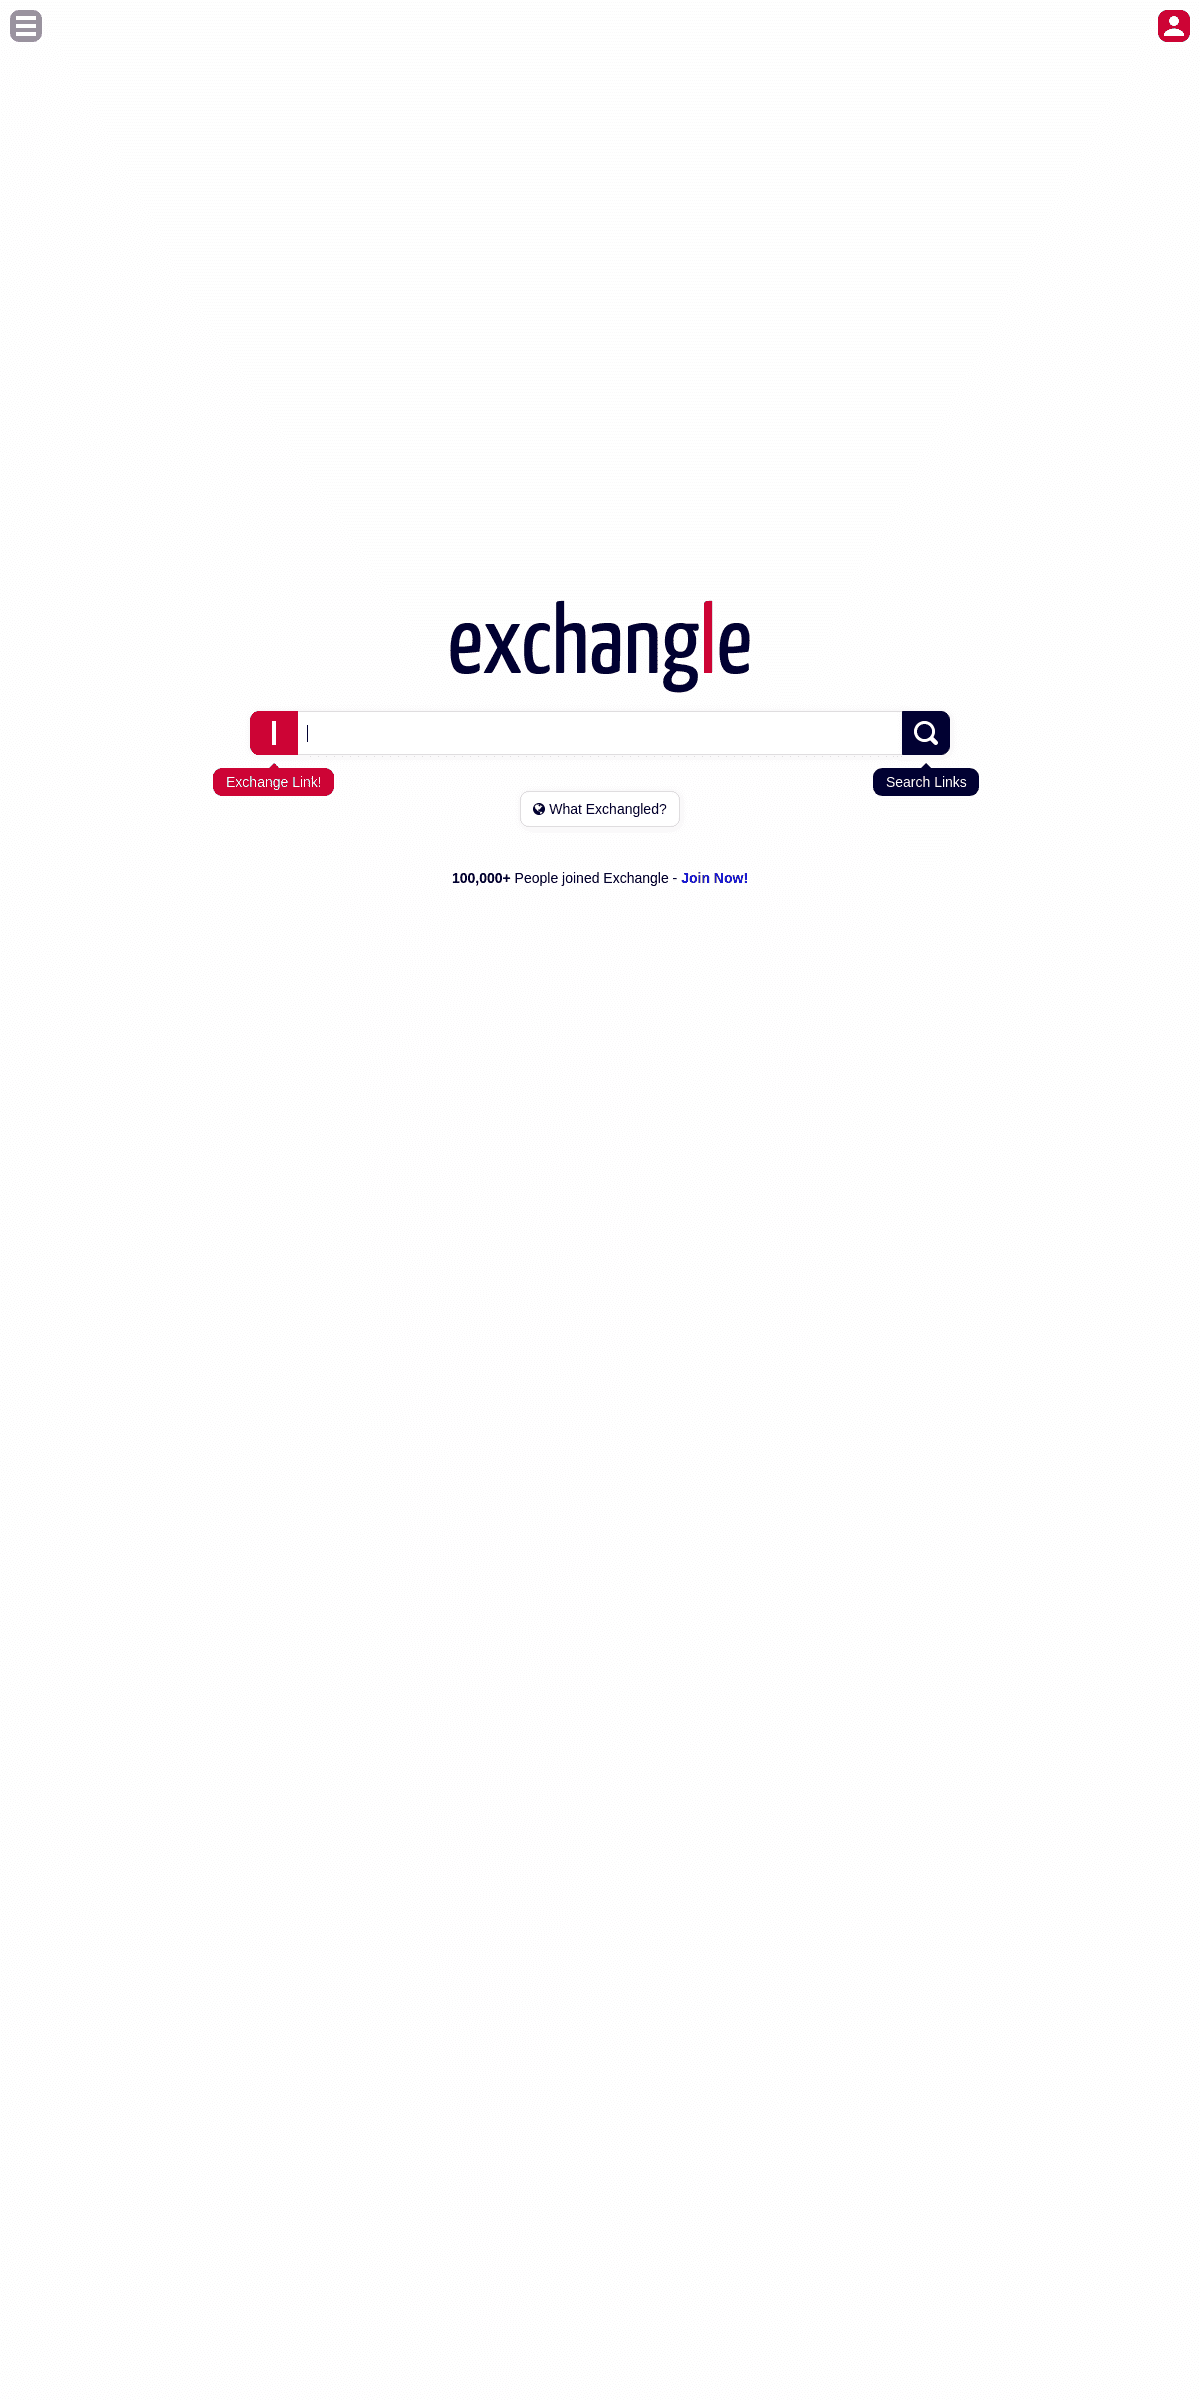 A complete backup of exchangle.com